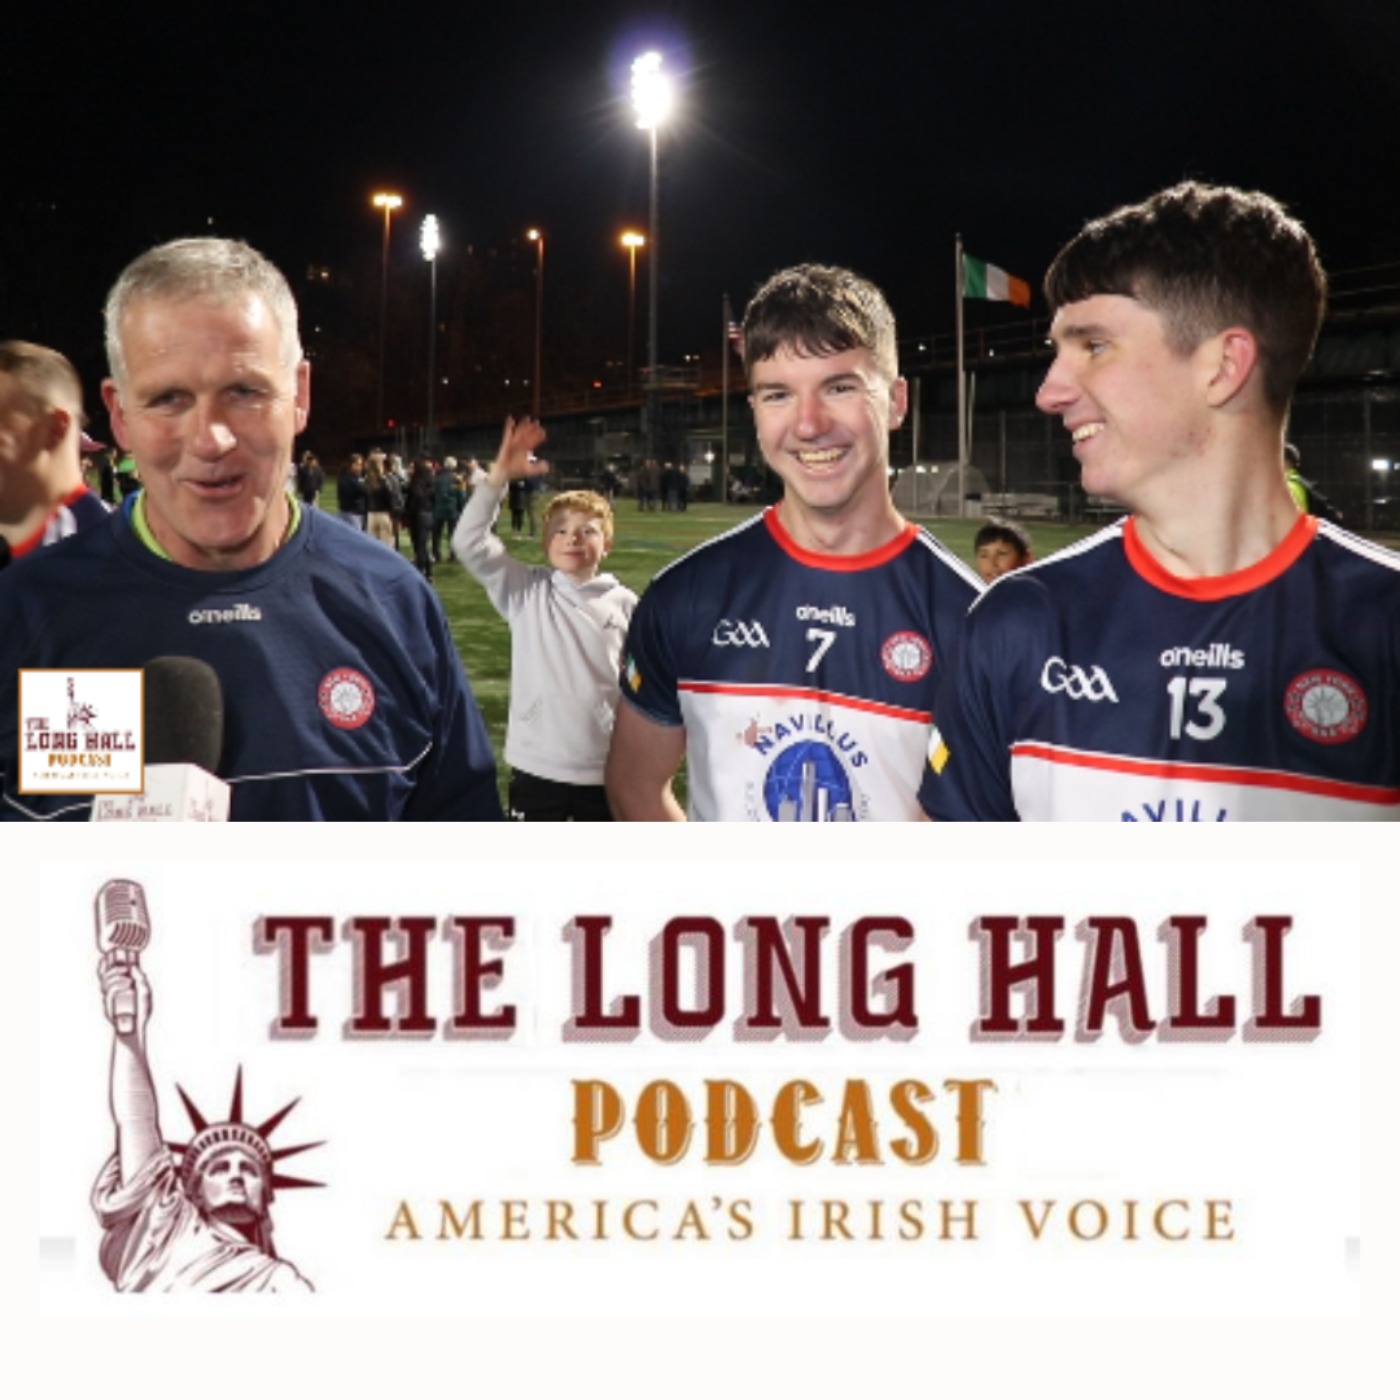 Post Match Interview: The Brosnan Brothers and Their Father Mike Brosnan